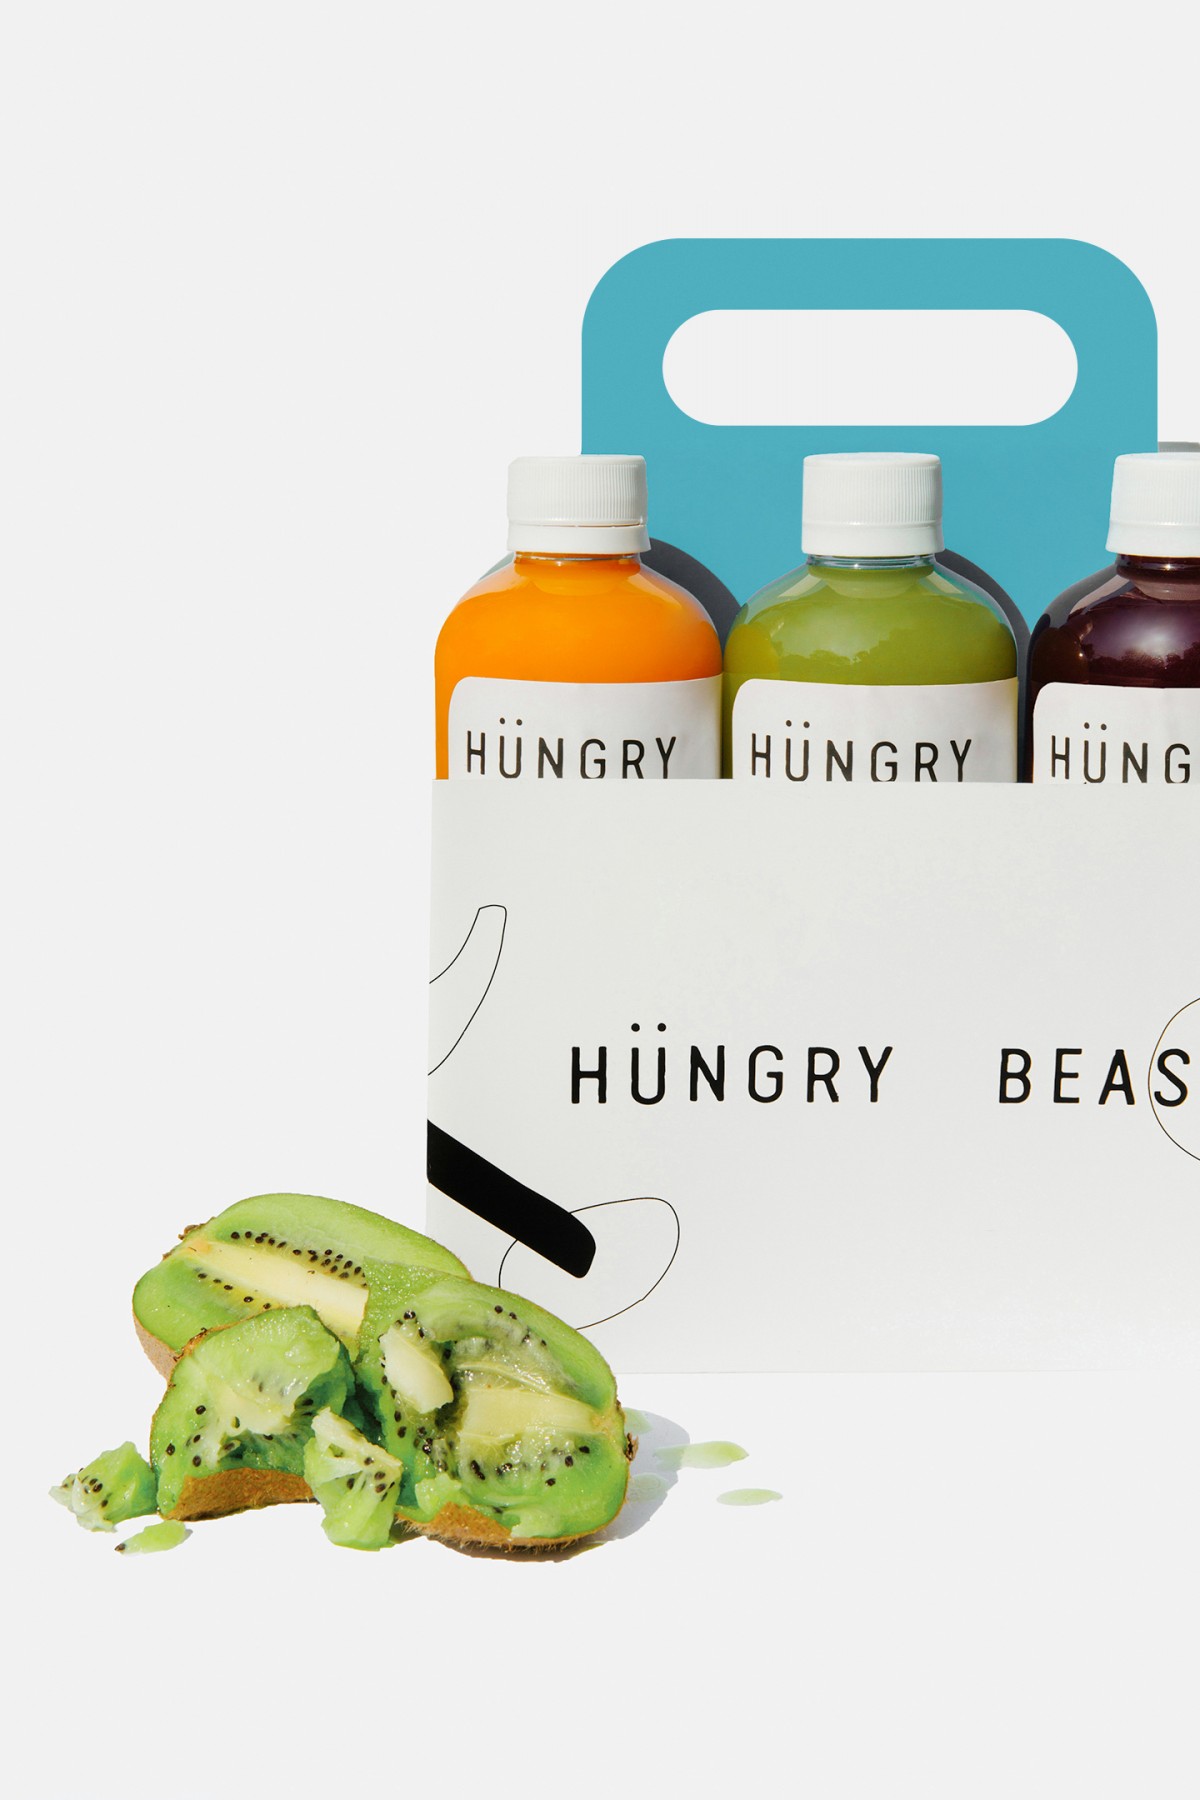  logo , graphic identity and packaging designed by Savvy for Mexican cafe and juice bar Hüngry Beast